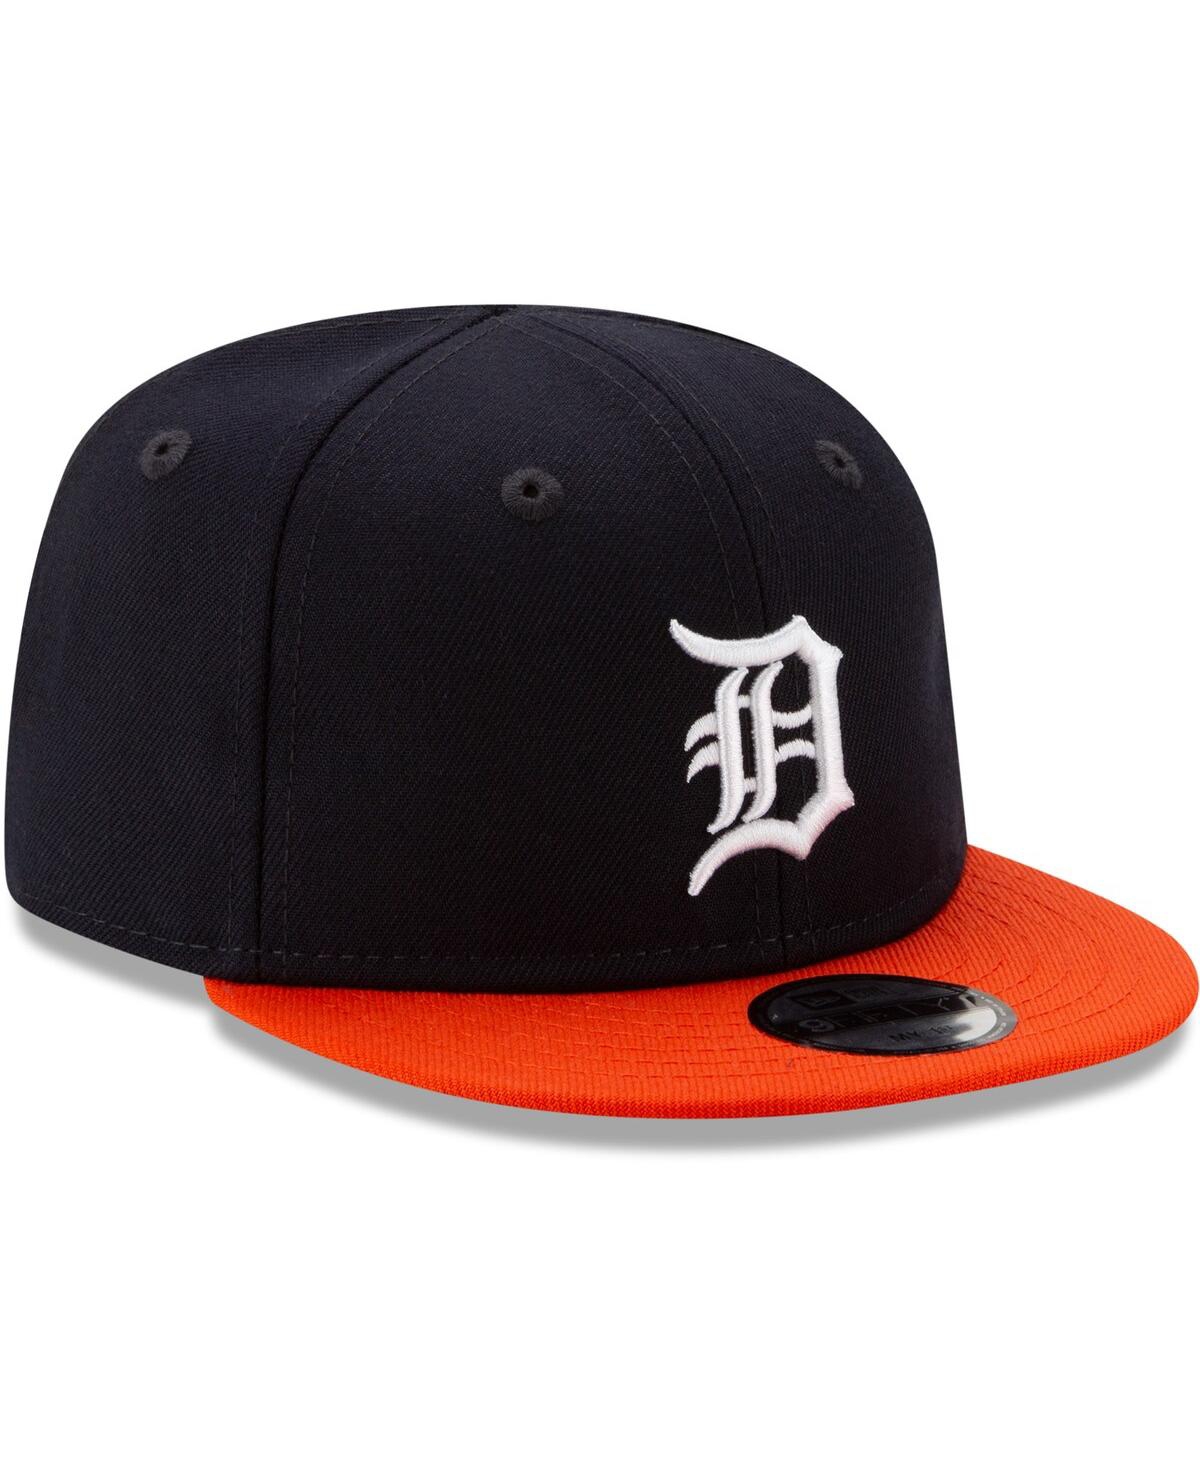 Shop New Era Infant Unisex  Navy Detroit Tigers My First 9fifty Hat